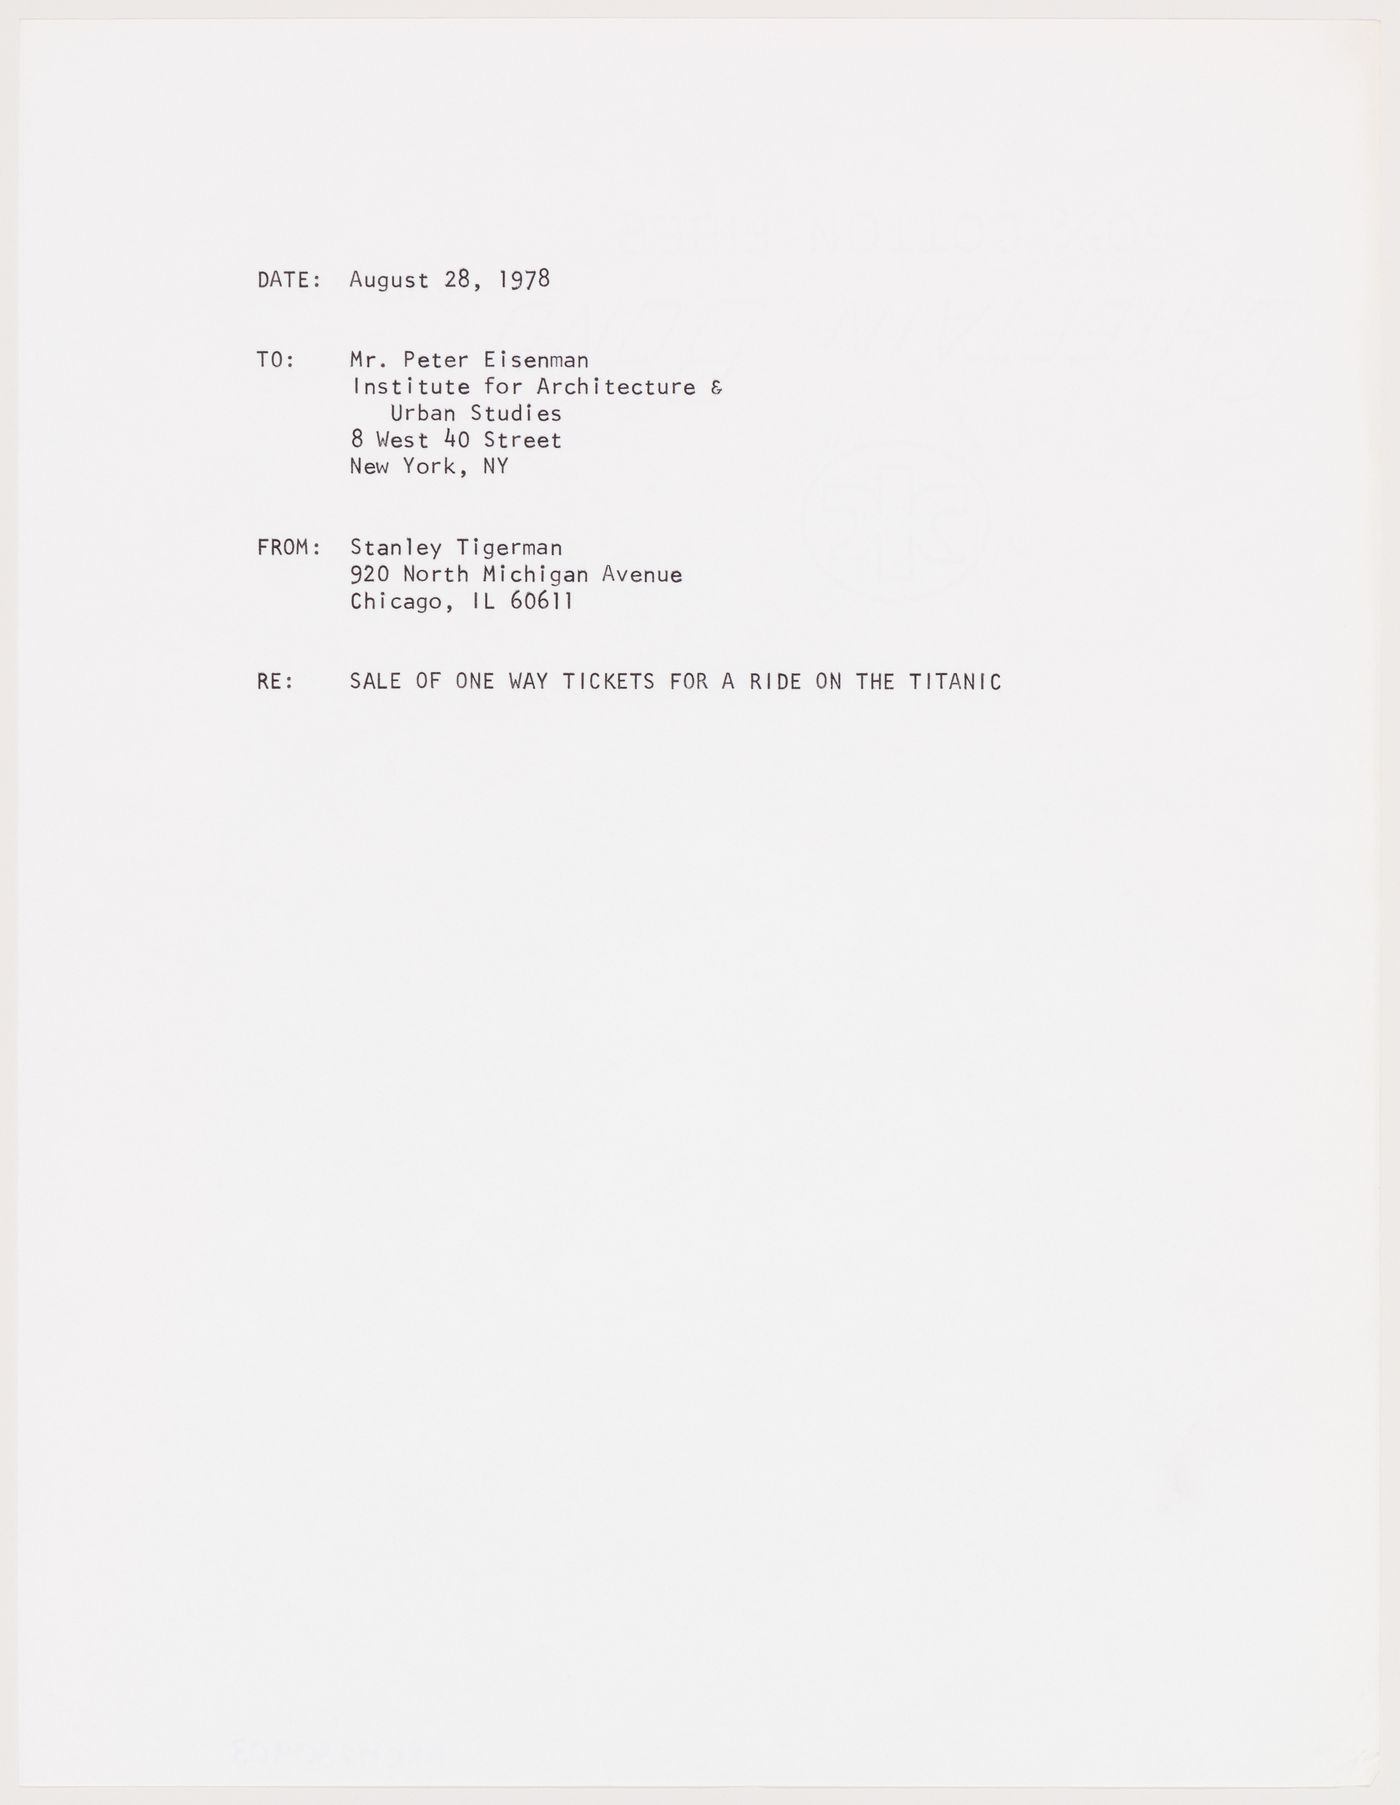 Letter to Peter Eisenman from Stanley Tigerman